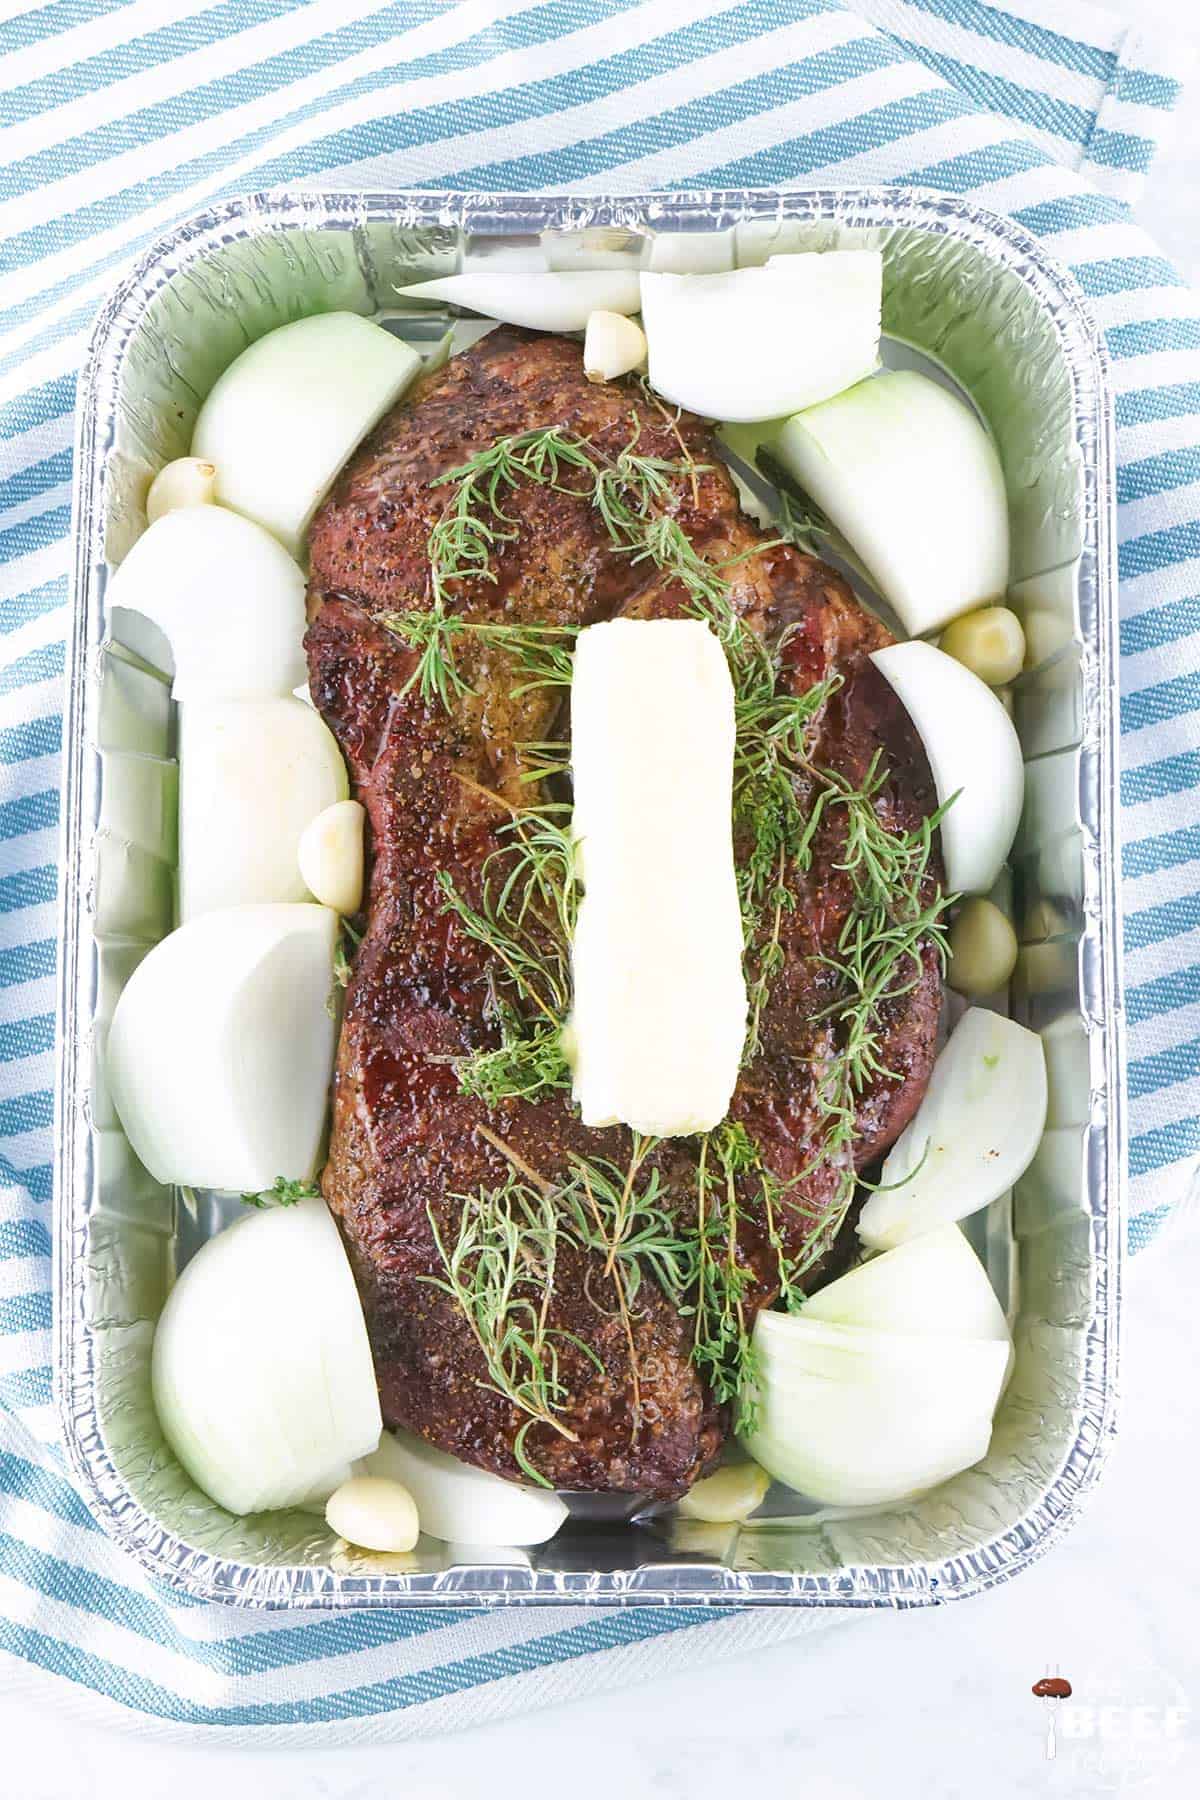 Chuck roast in a roasting pan with butter, onions and herbs